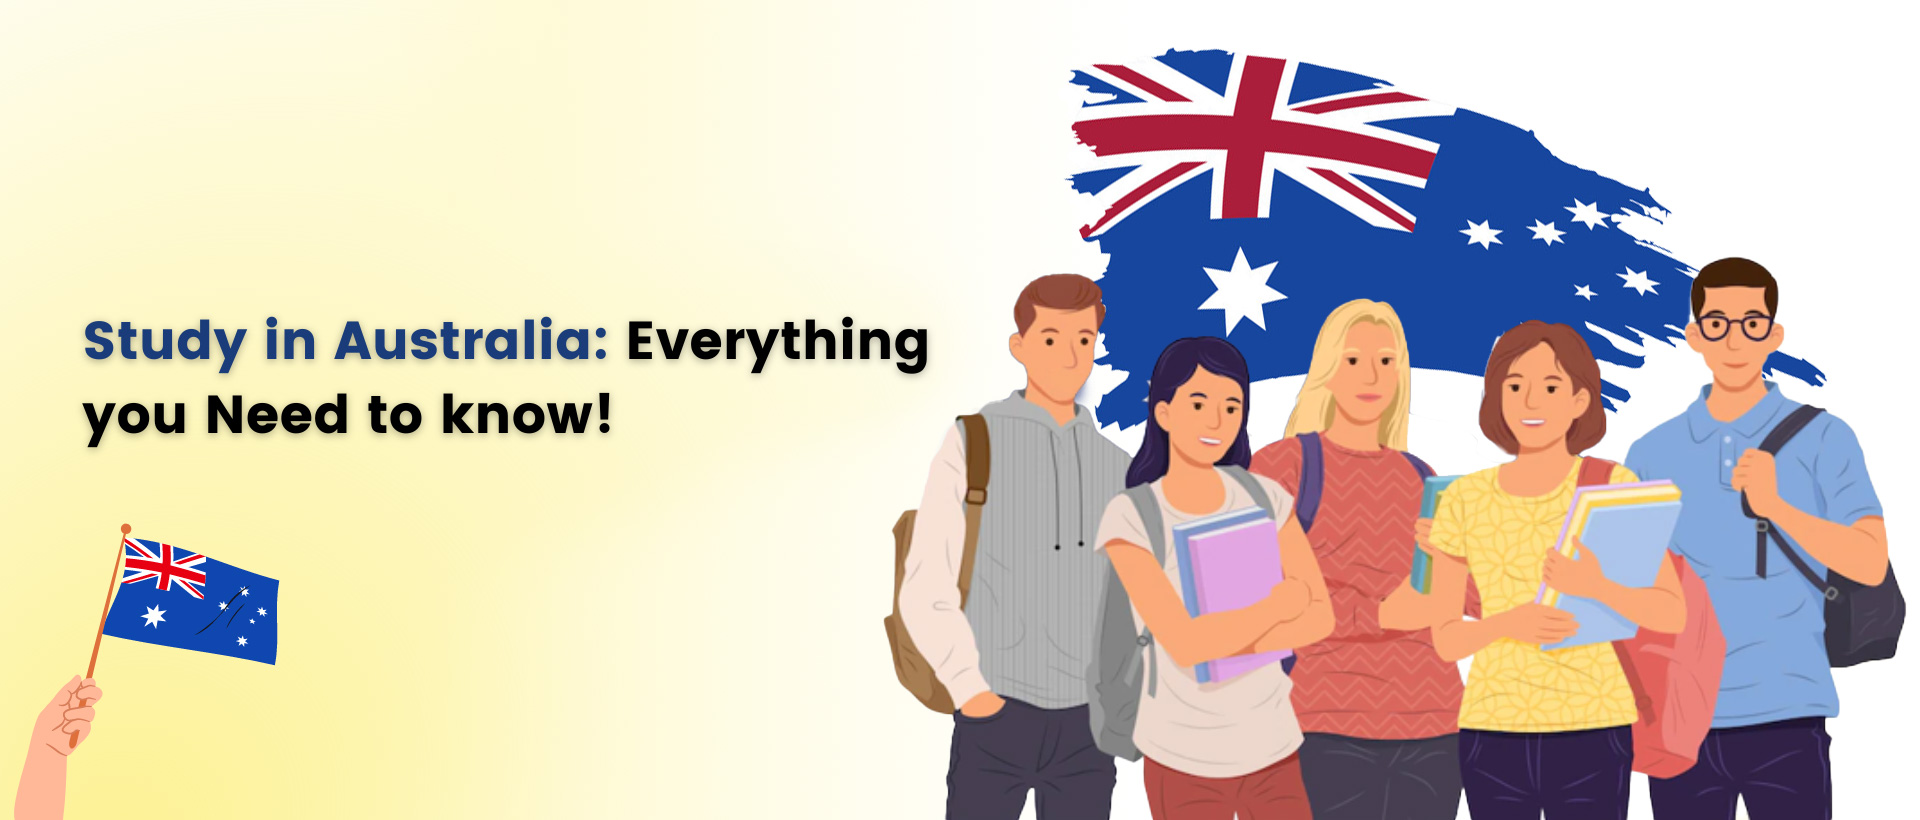 Study in Australia: Everything you Need to know!